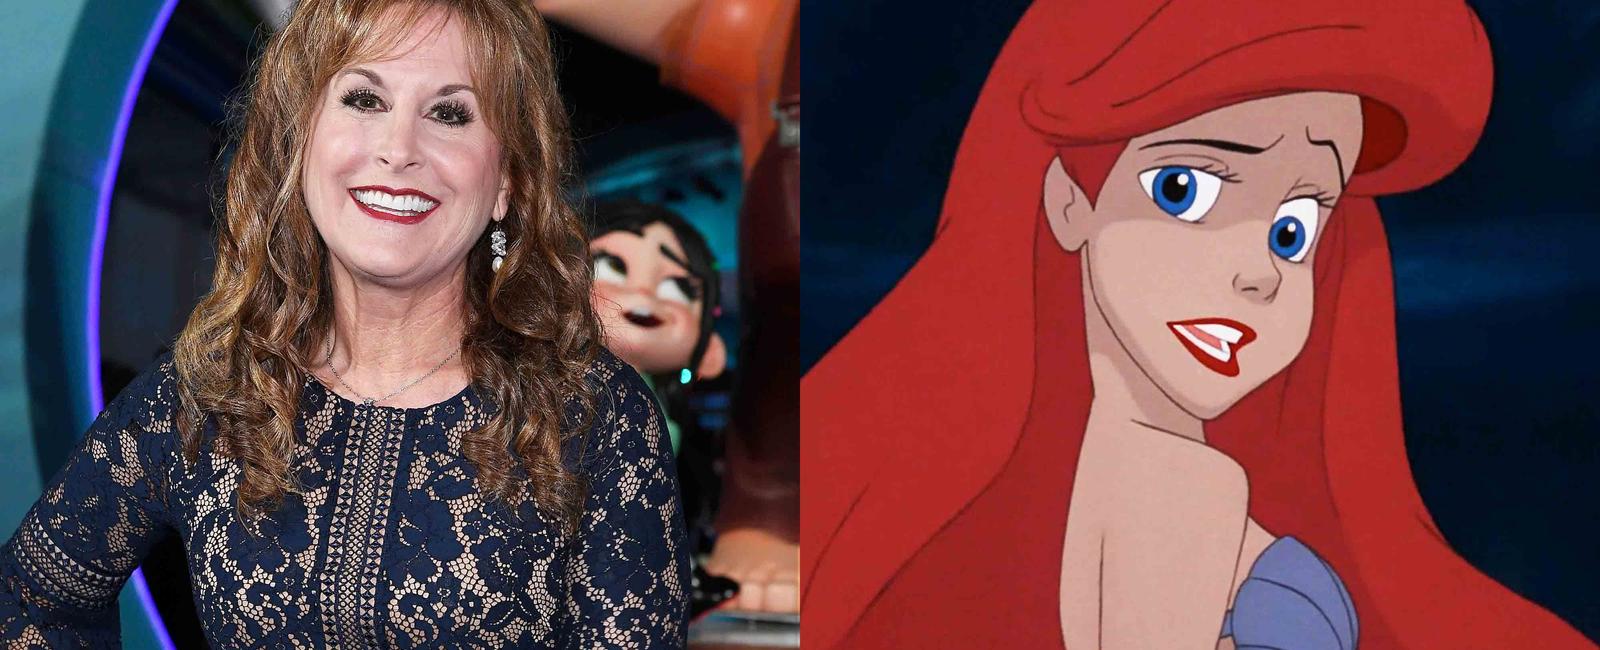 Jodi benson was the voice actor for the little mermaid as well as barbie in toy story 3